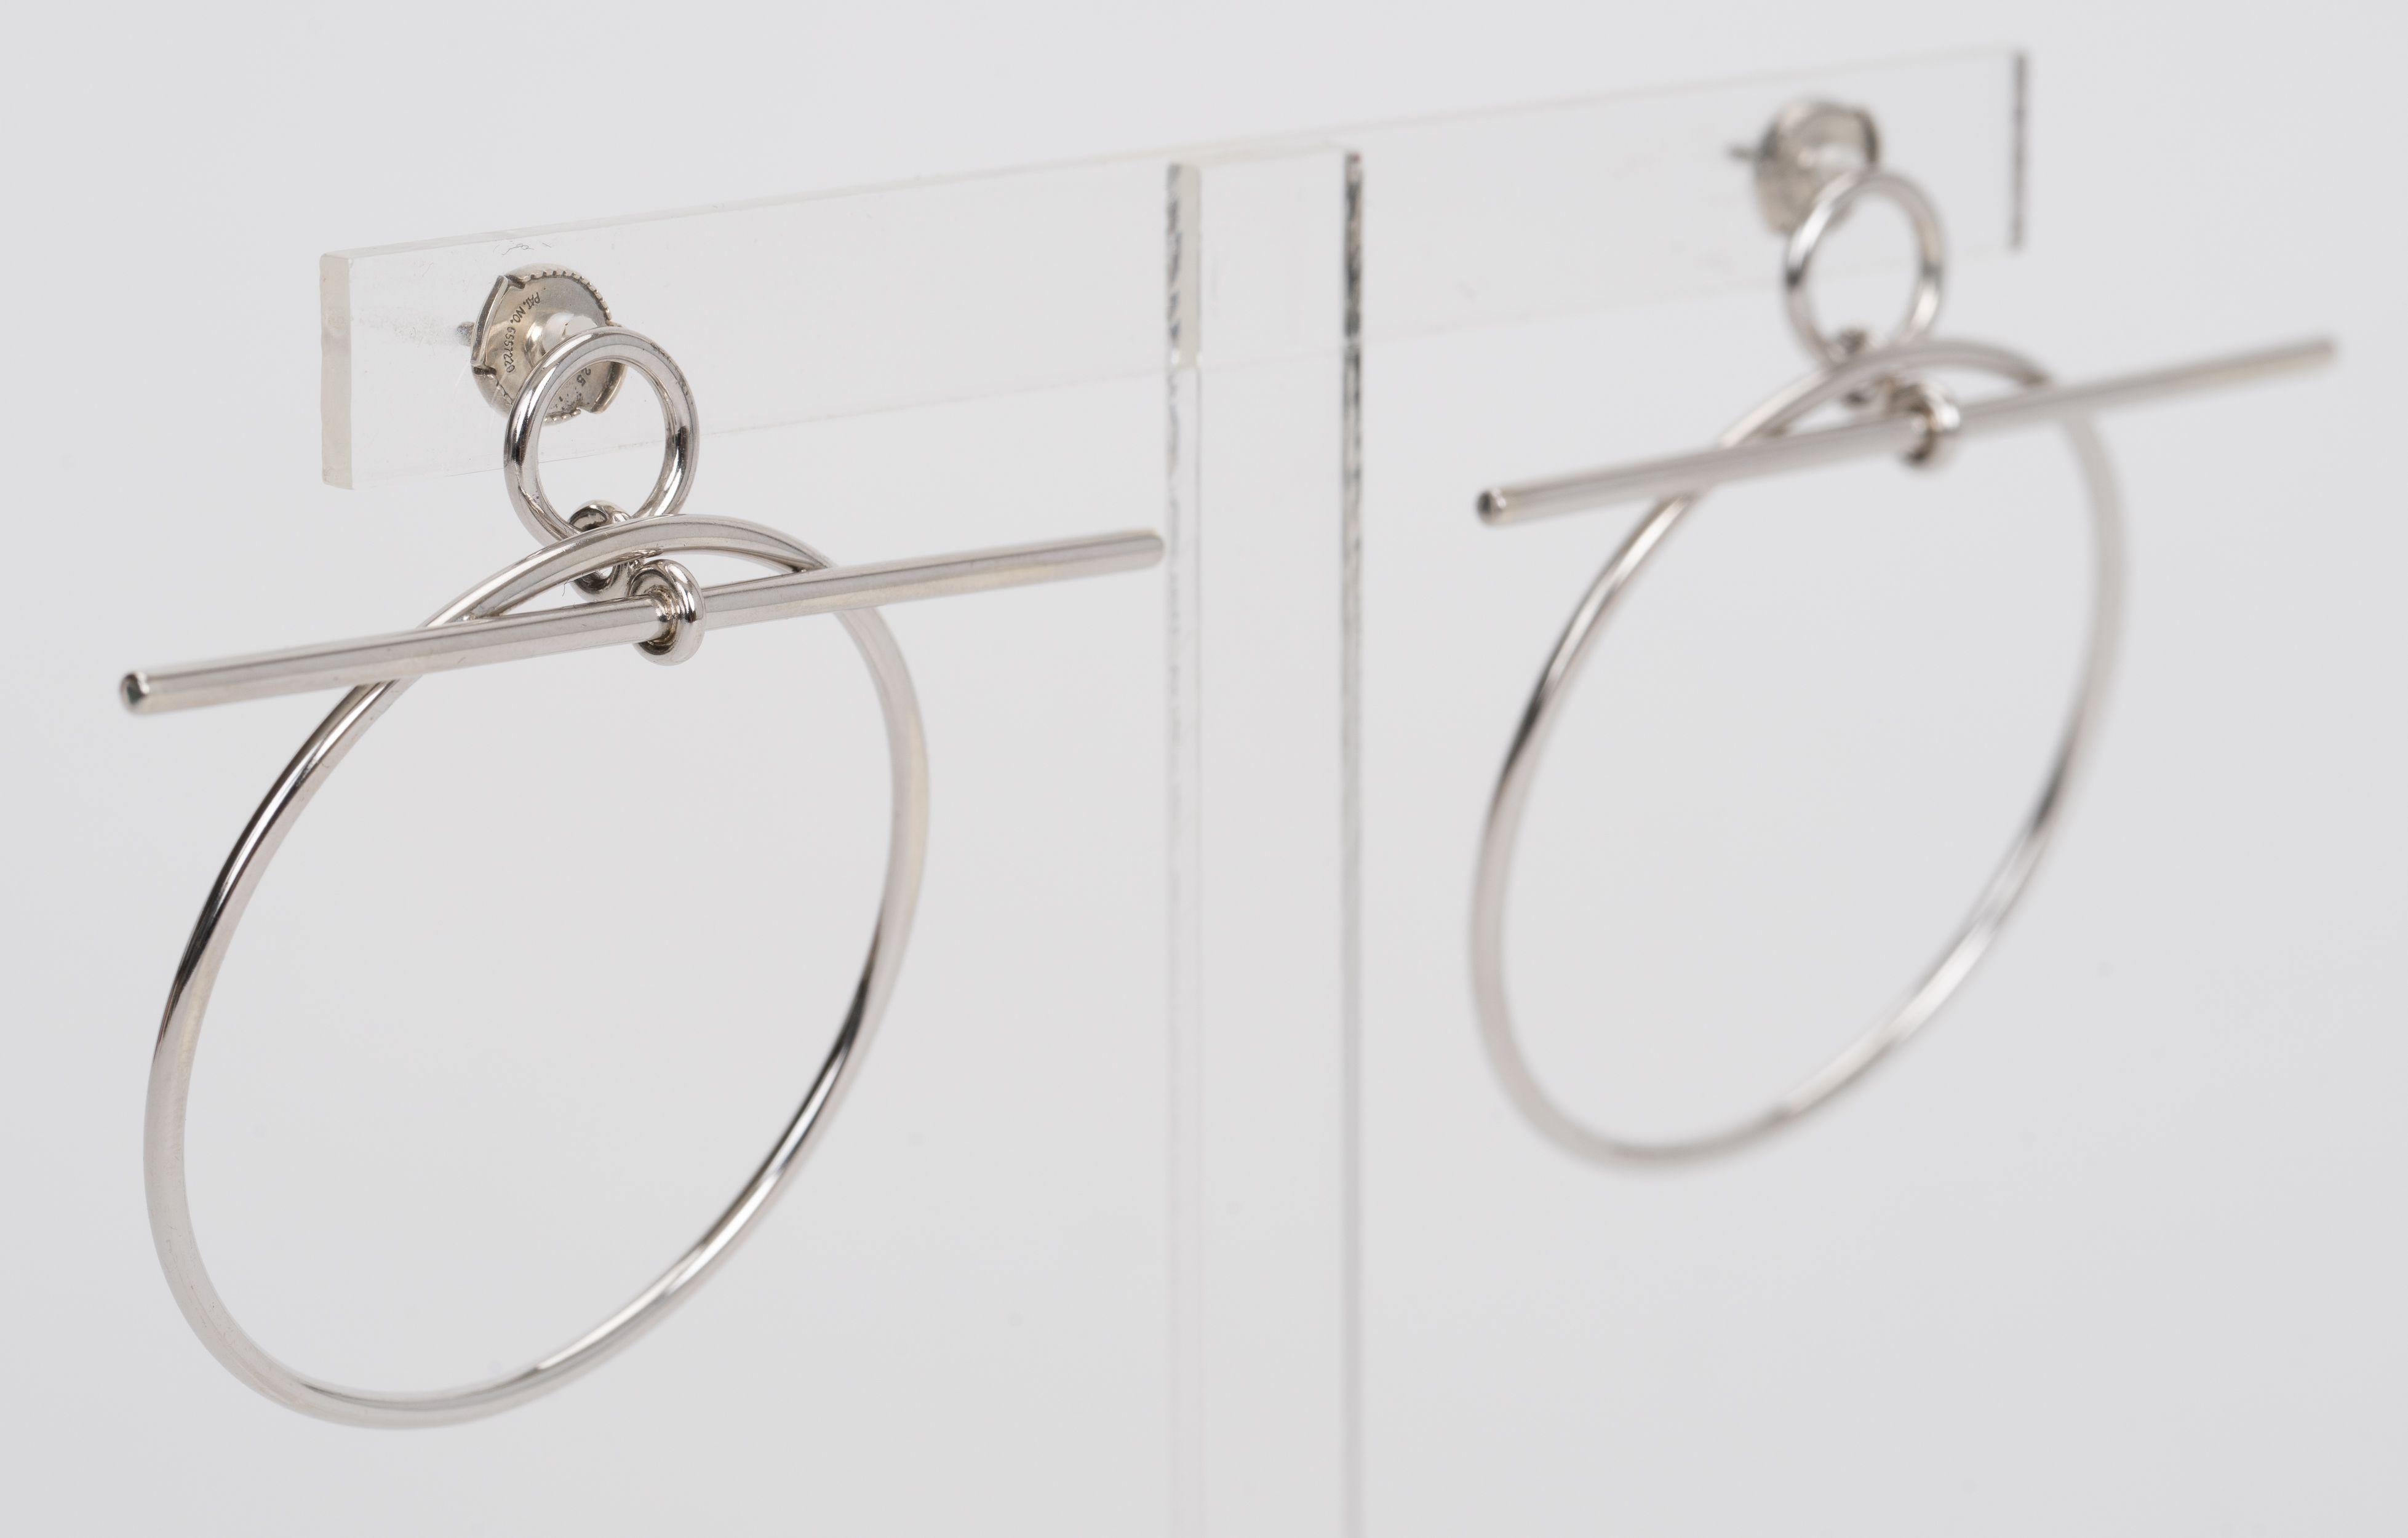 The Hermes Loop Earrings in medium are made from sterling silver and feature a toggle clasp. The earrings feature a minimalist and graphic style. Serial number. 925 silver stamp. Come with velvet pouch.